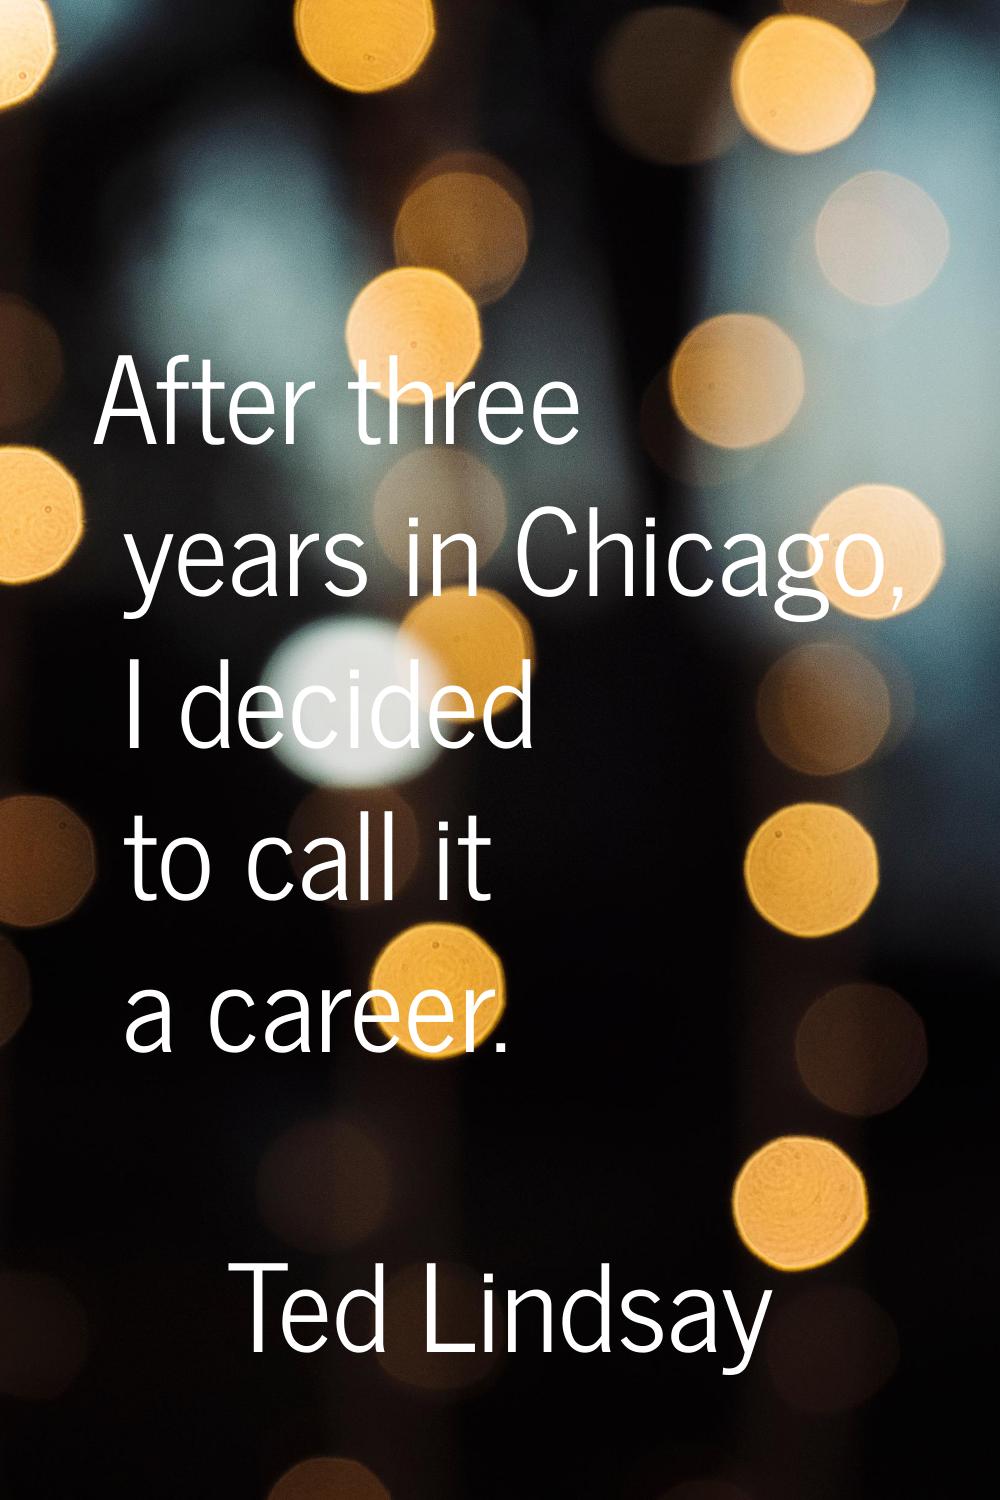 After three years in Chicago, I decided to call it a career.